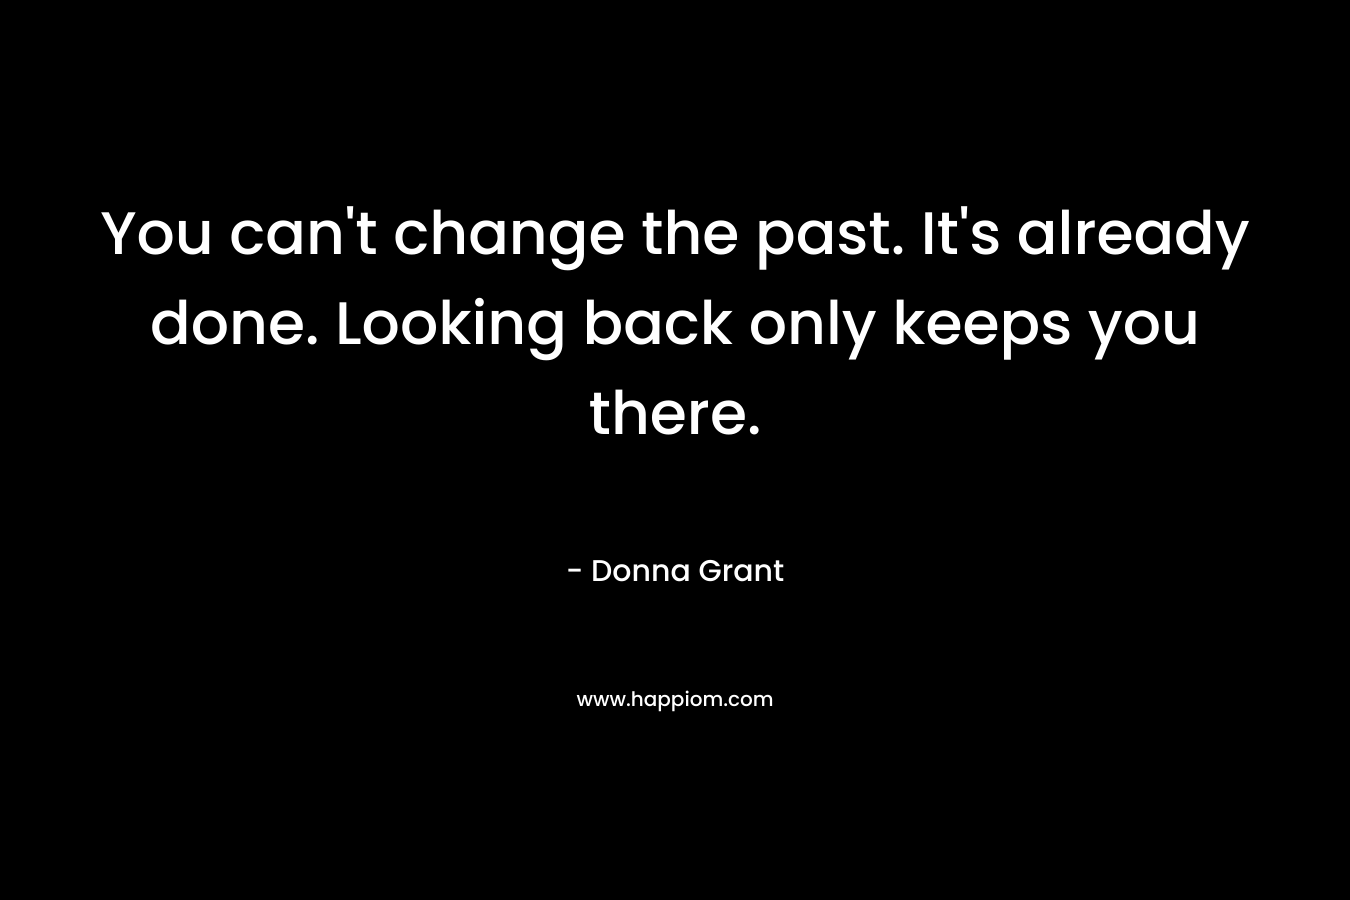 You can’t change the past. It’s already done. Looking back only keeps you there. – Donna Grant